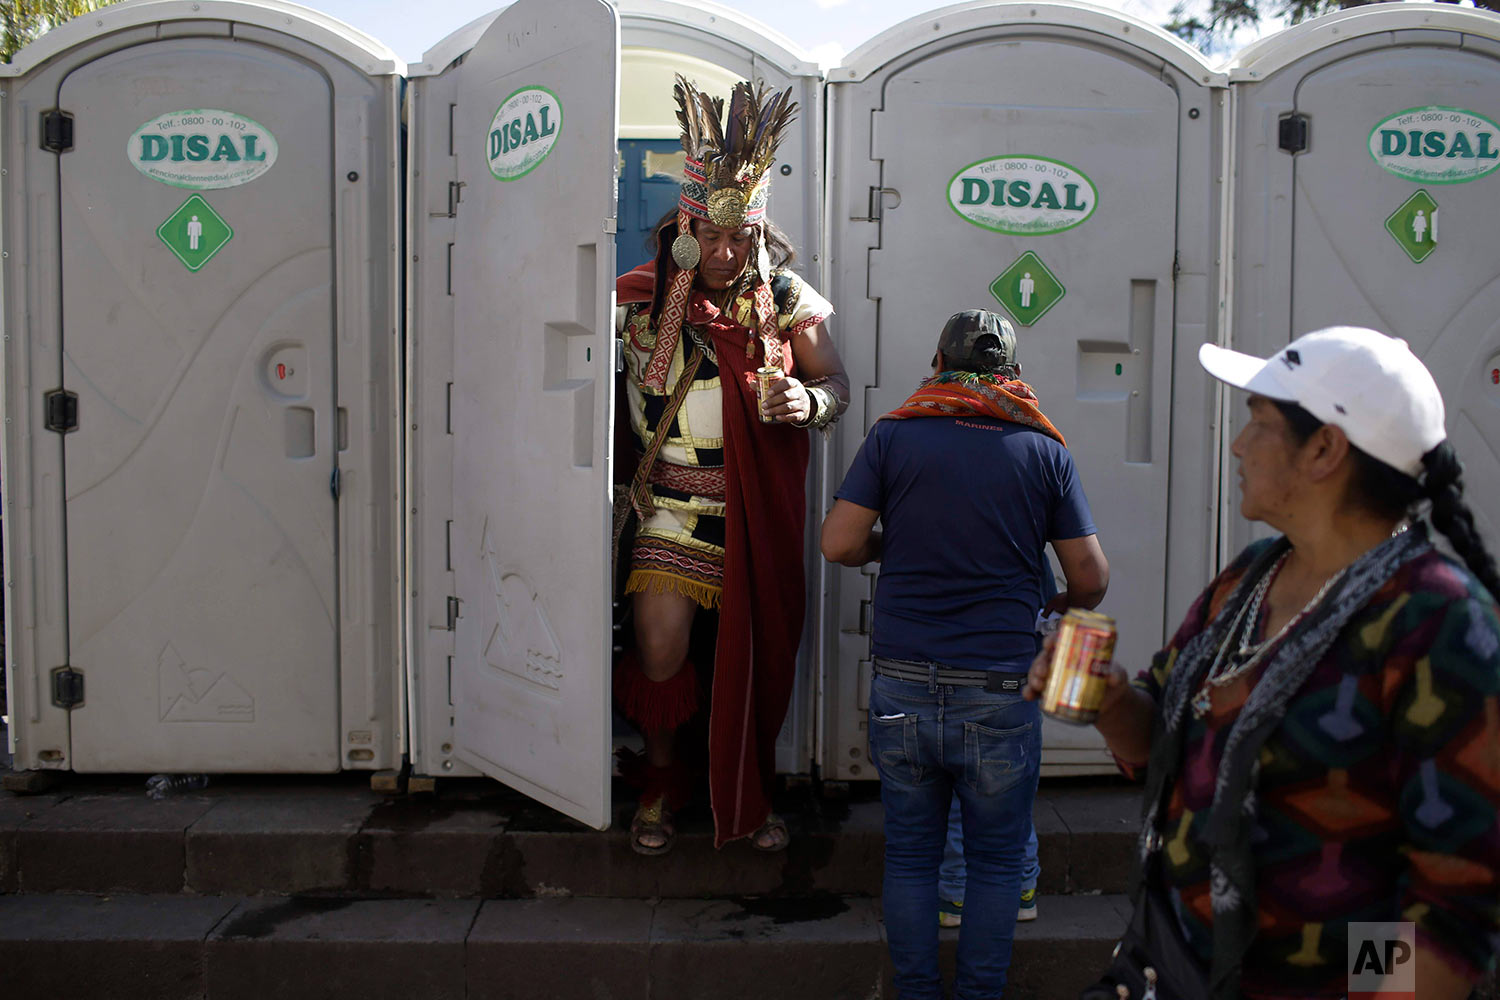  A man dressed a the Inca Emperor Atahualpa leaves of a porta-pottie as he holds a beer, in Cuzco, Peru, June 23, 2018, during the Inti Raymi, the Festival of the Sun. (AP Photo/Martin Mejia) 